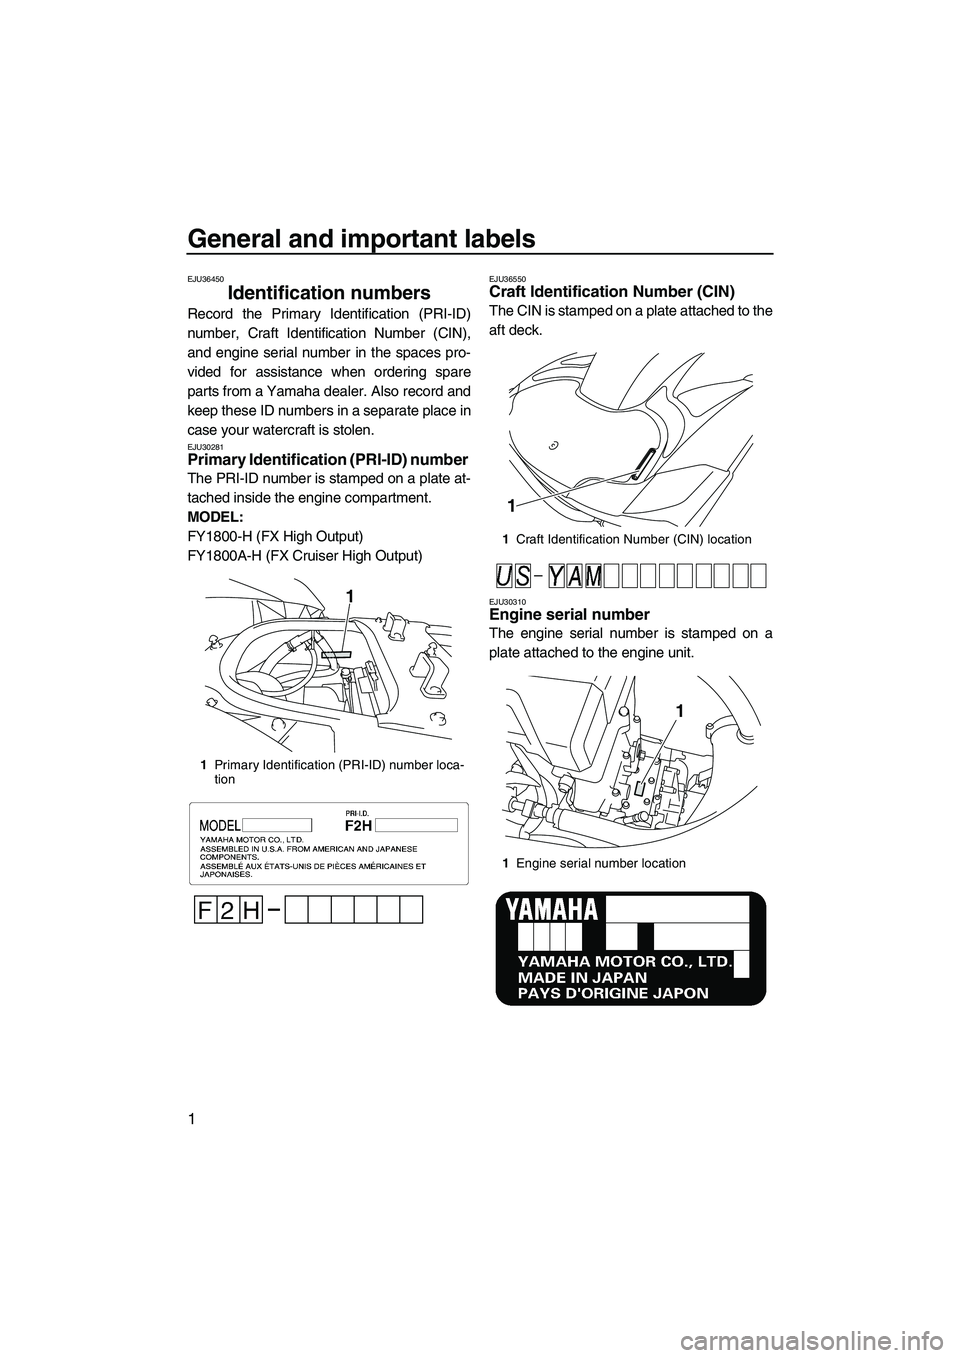 YAMAHA FX HO CRUISER 2009  Owners Manual General and important labels
1
EJU36450
Identification numbers 
Record the Primary Identification (PRI-ID)
number, Craft Identification Number (CIN),
and engine serial number in the spaces pro-
vided 